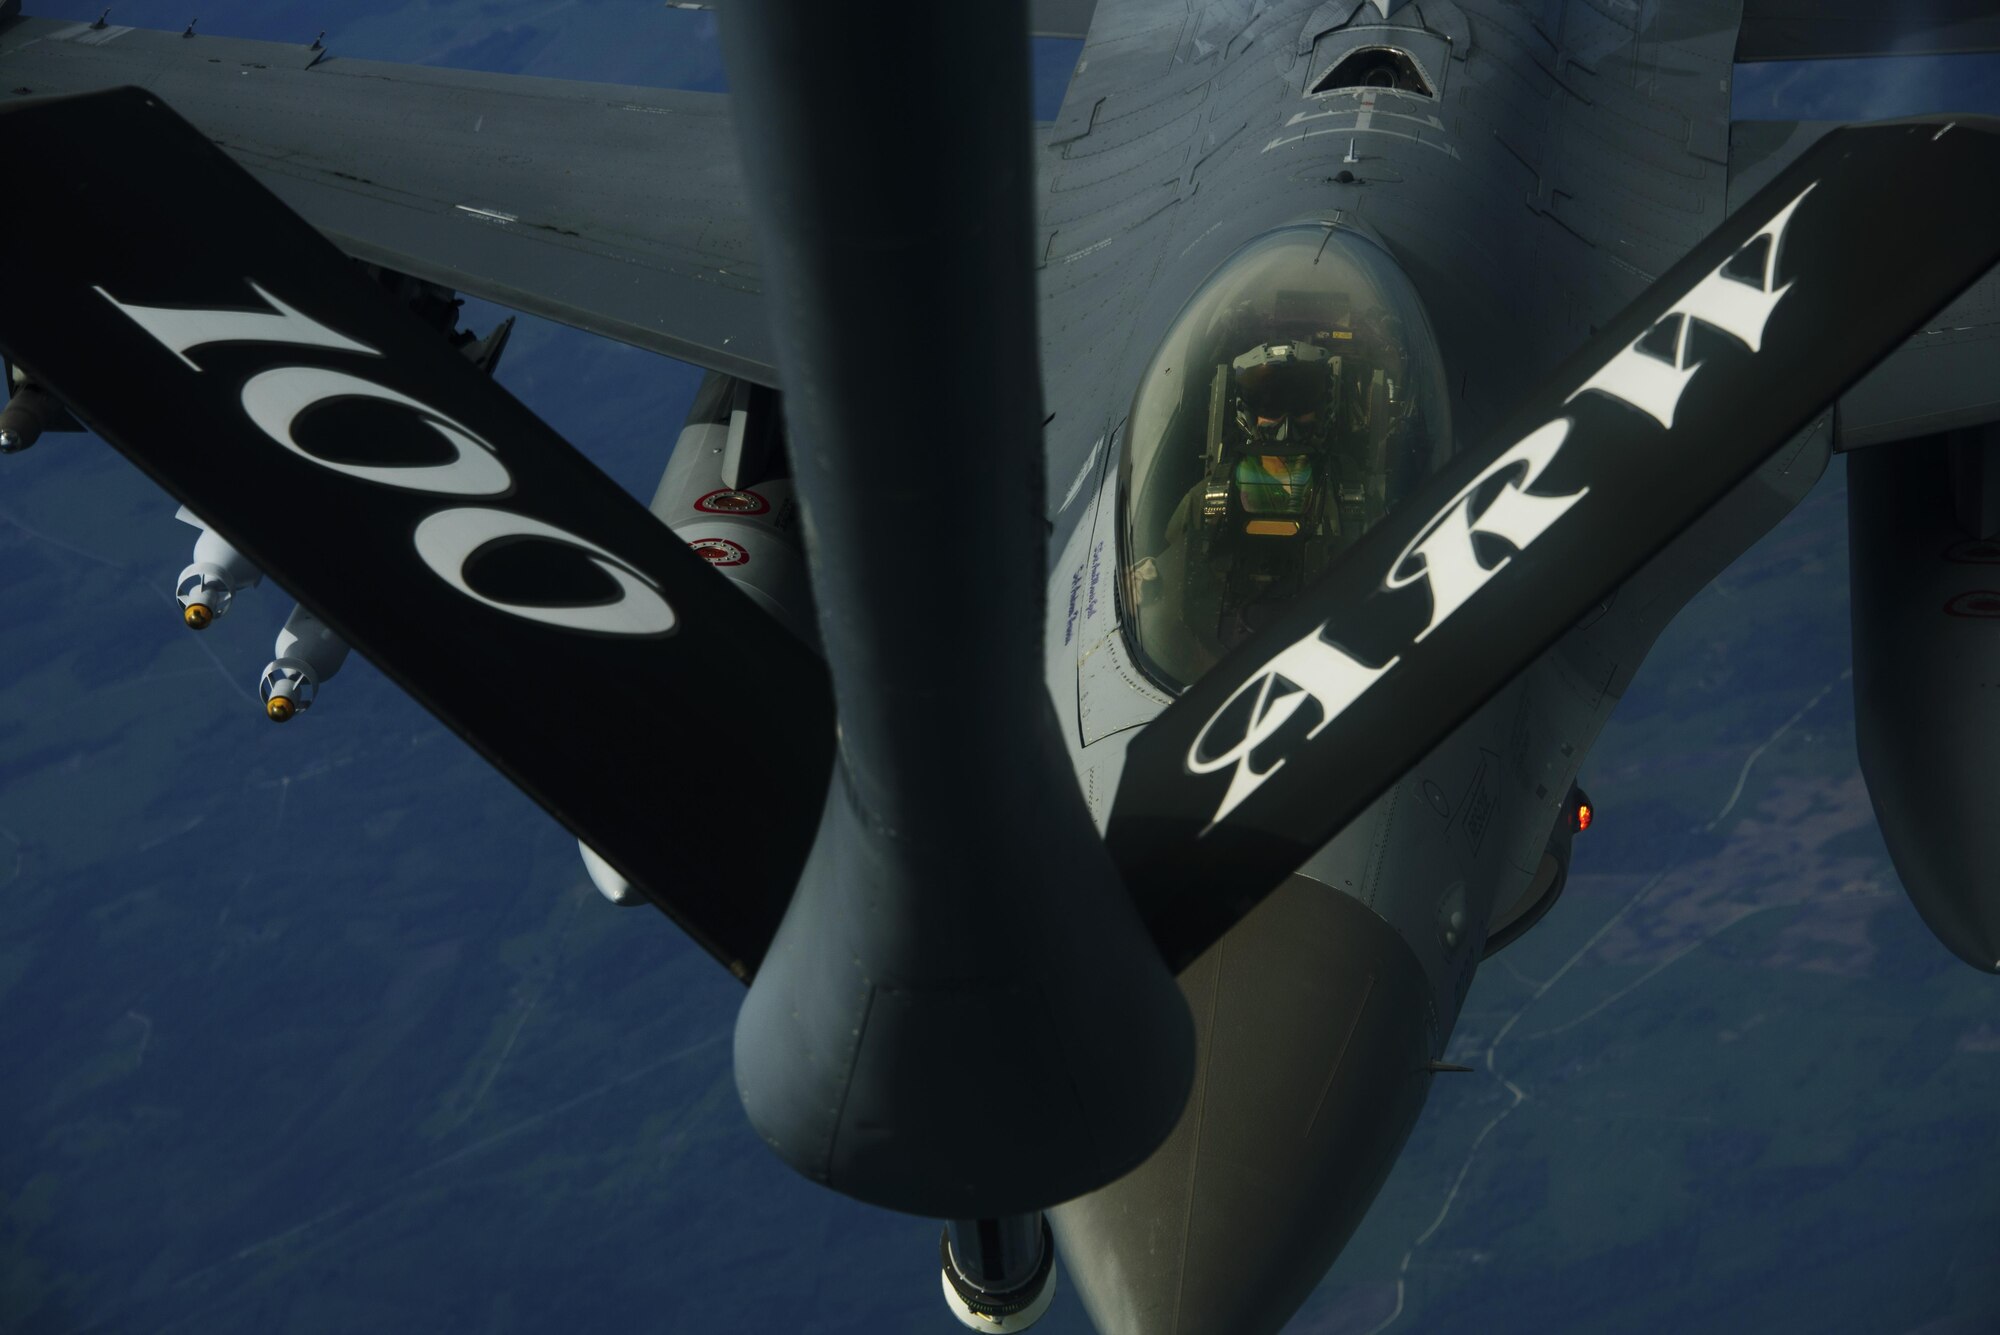 An F-16 Fighting Falcon, 510th Fighter Squadron, refuels from a KC-135R Stratotanker, 100th Air Refueling Wing, from RAF Mildenhall, England in support of Aviation Detachment rotation 17-3, exercise BALTOPS and exercise Saber Strike exercise over Latvia, June 7, 2017. BALTOPS is an annually recurring multinational exercise designed to enhance flexibility and interoperability, as well as demonstrate resolve of allied and partner forces to defend the Baltic region. Participating nations include Belgium,
Denmark, Estonia, Finland, France, Germany, Latvia, Lithuania, the Netherlands, Norway, Poland, Sweden, the United Kingdom, and the United States. (U.S. Air Force photo by Staff Sgt. Jonathan Snyder)